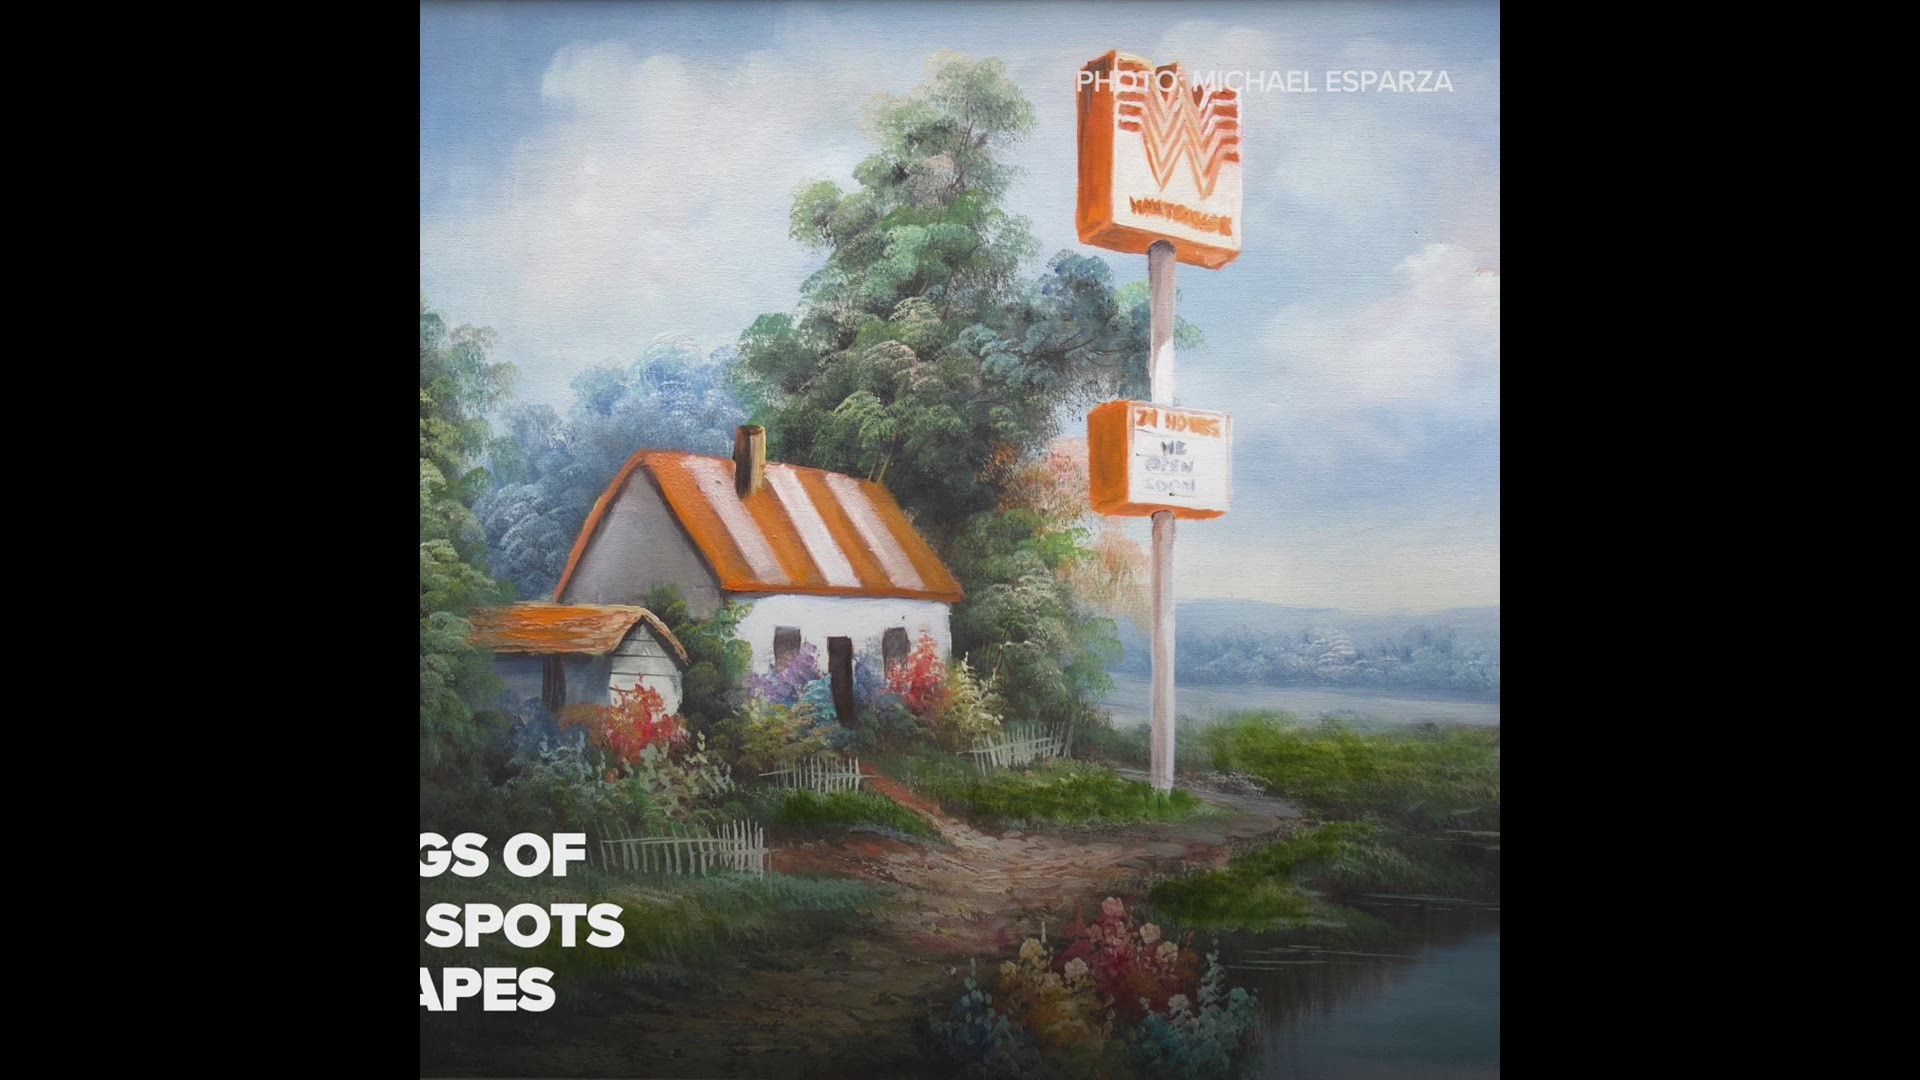 Michael Esparza seems to have started a movement with his series of oil paintings paying homage to Texas' favorite fast food. WFAA.com